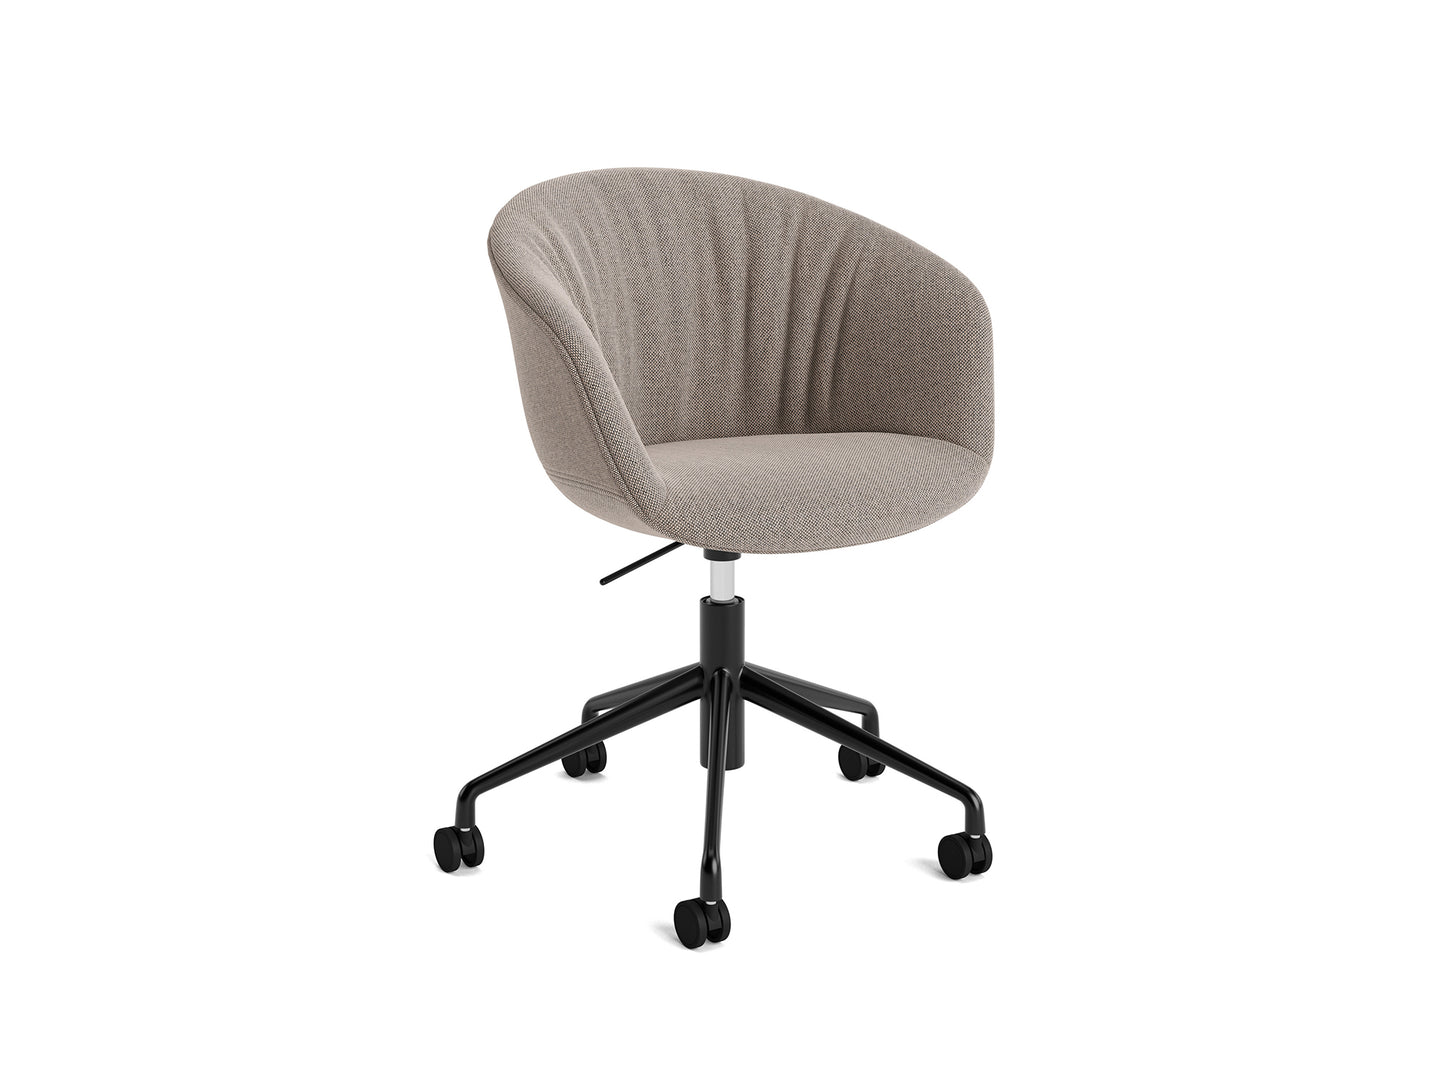 About A Chair AAC 53 Soft by HAY - Re-Wool 628 / Black Powder Coated Aluminium